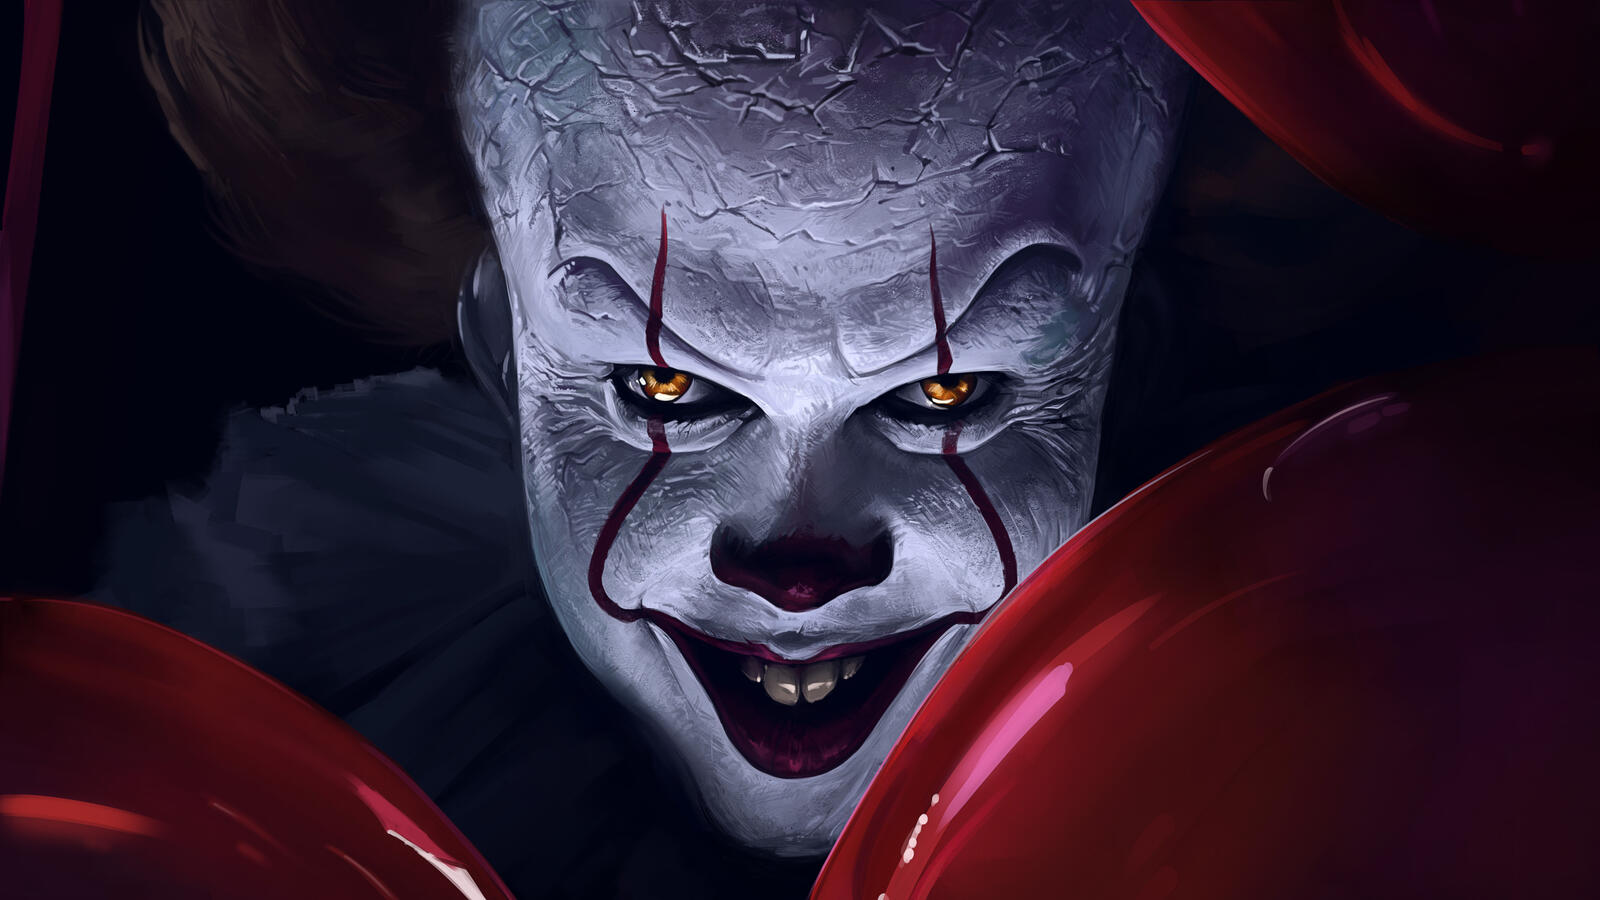 Wallpapers It Chapter Two 2019 Movies movies on the desktop